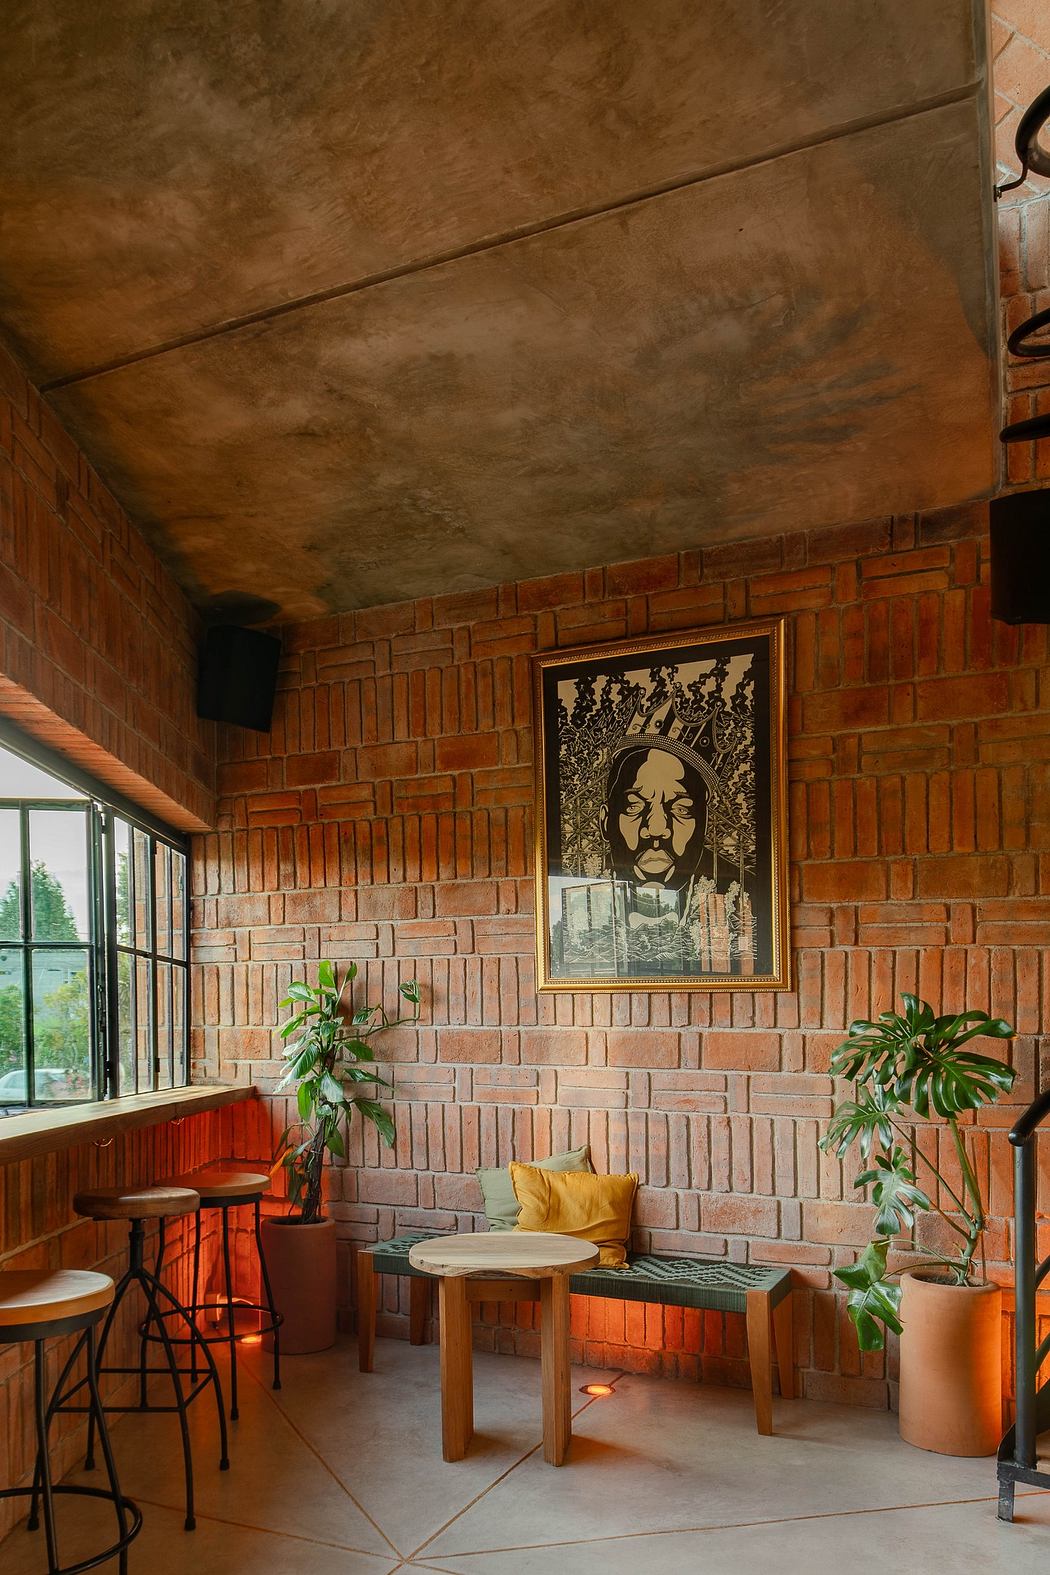 Modern interior with brick walls, bench seating, plants, and artwork.